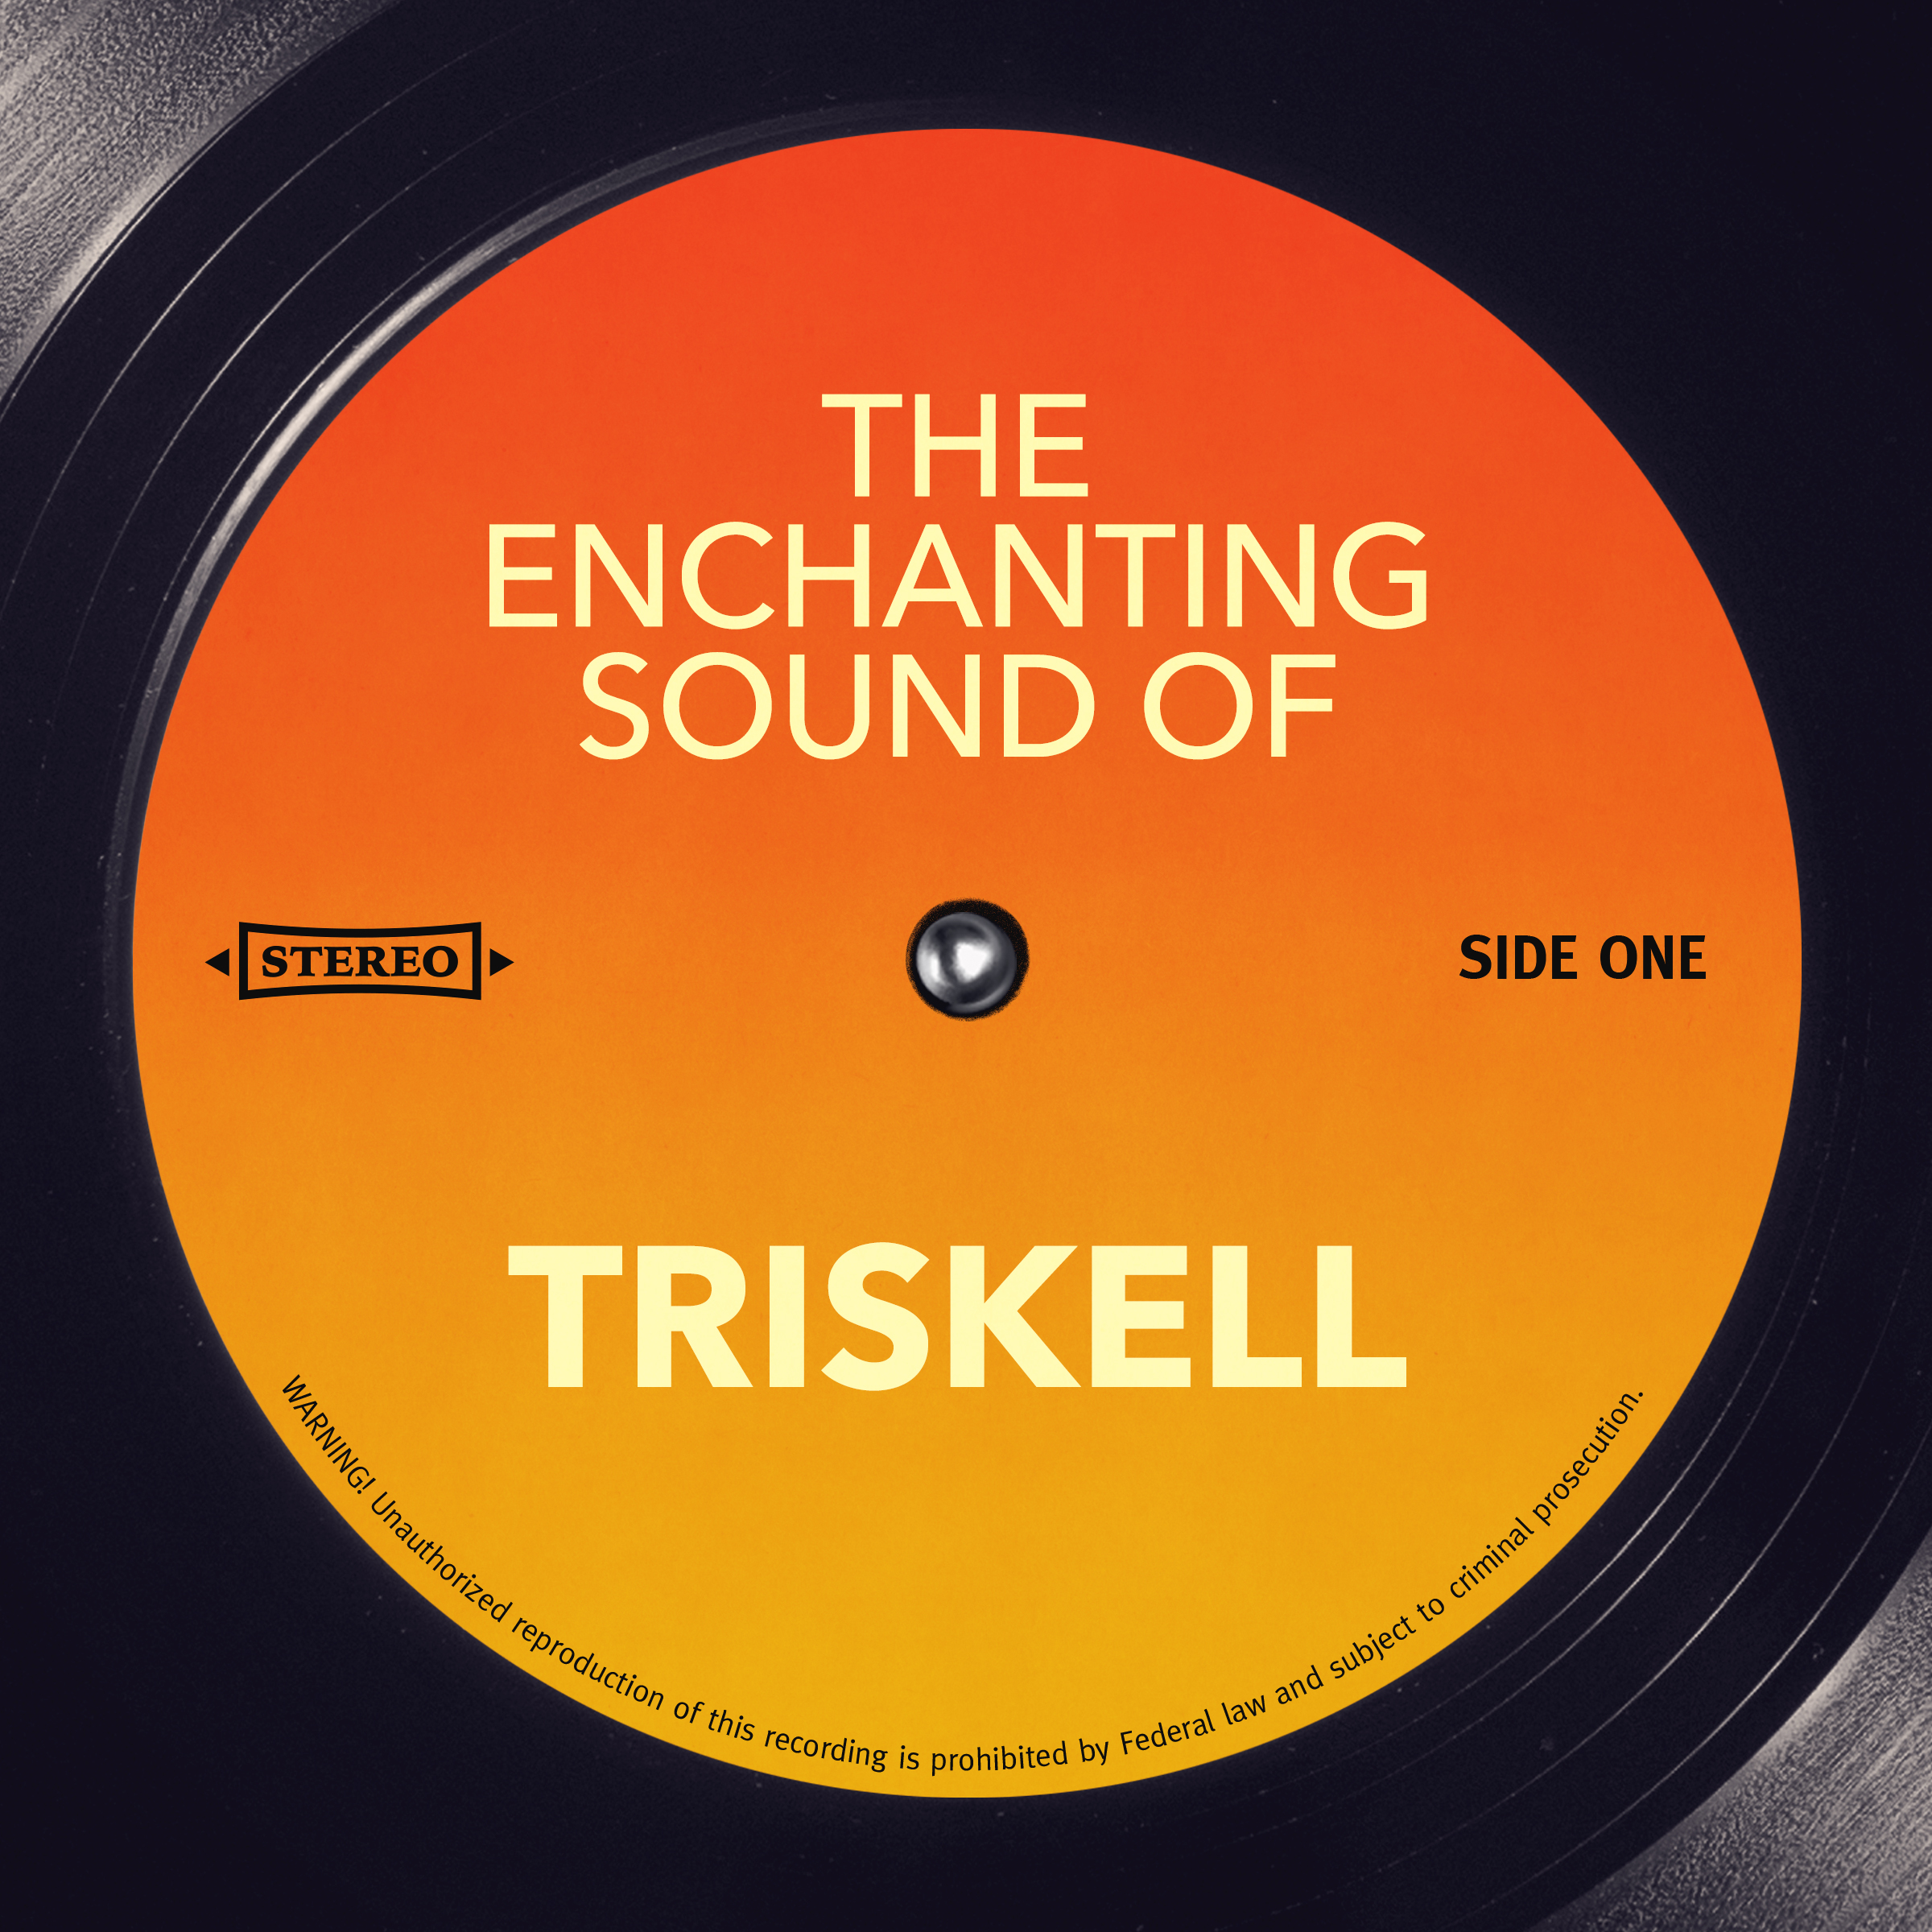 The Enchanting Sound of